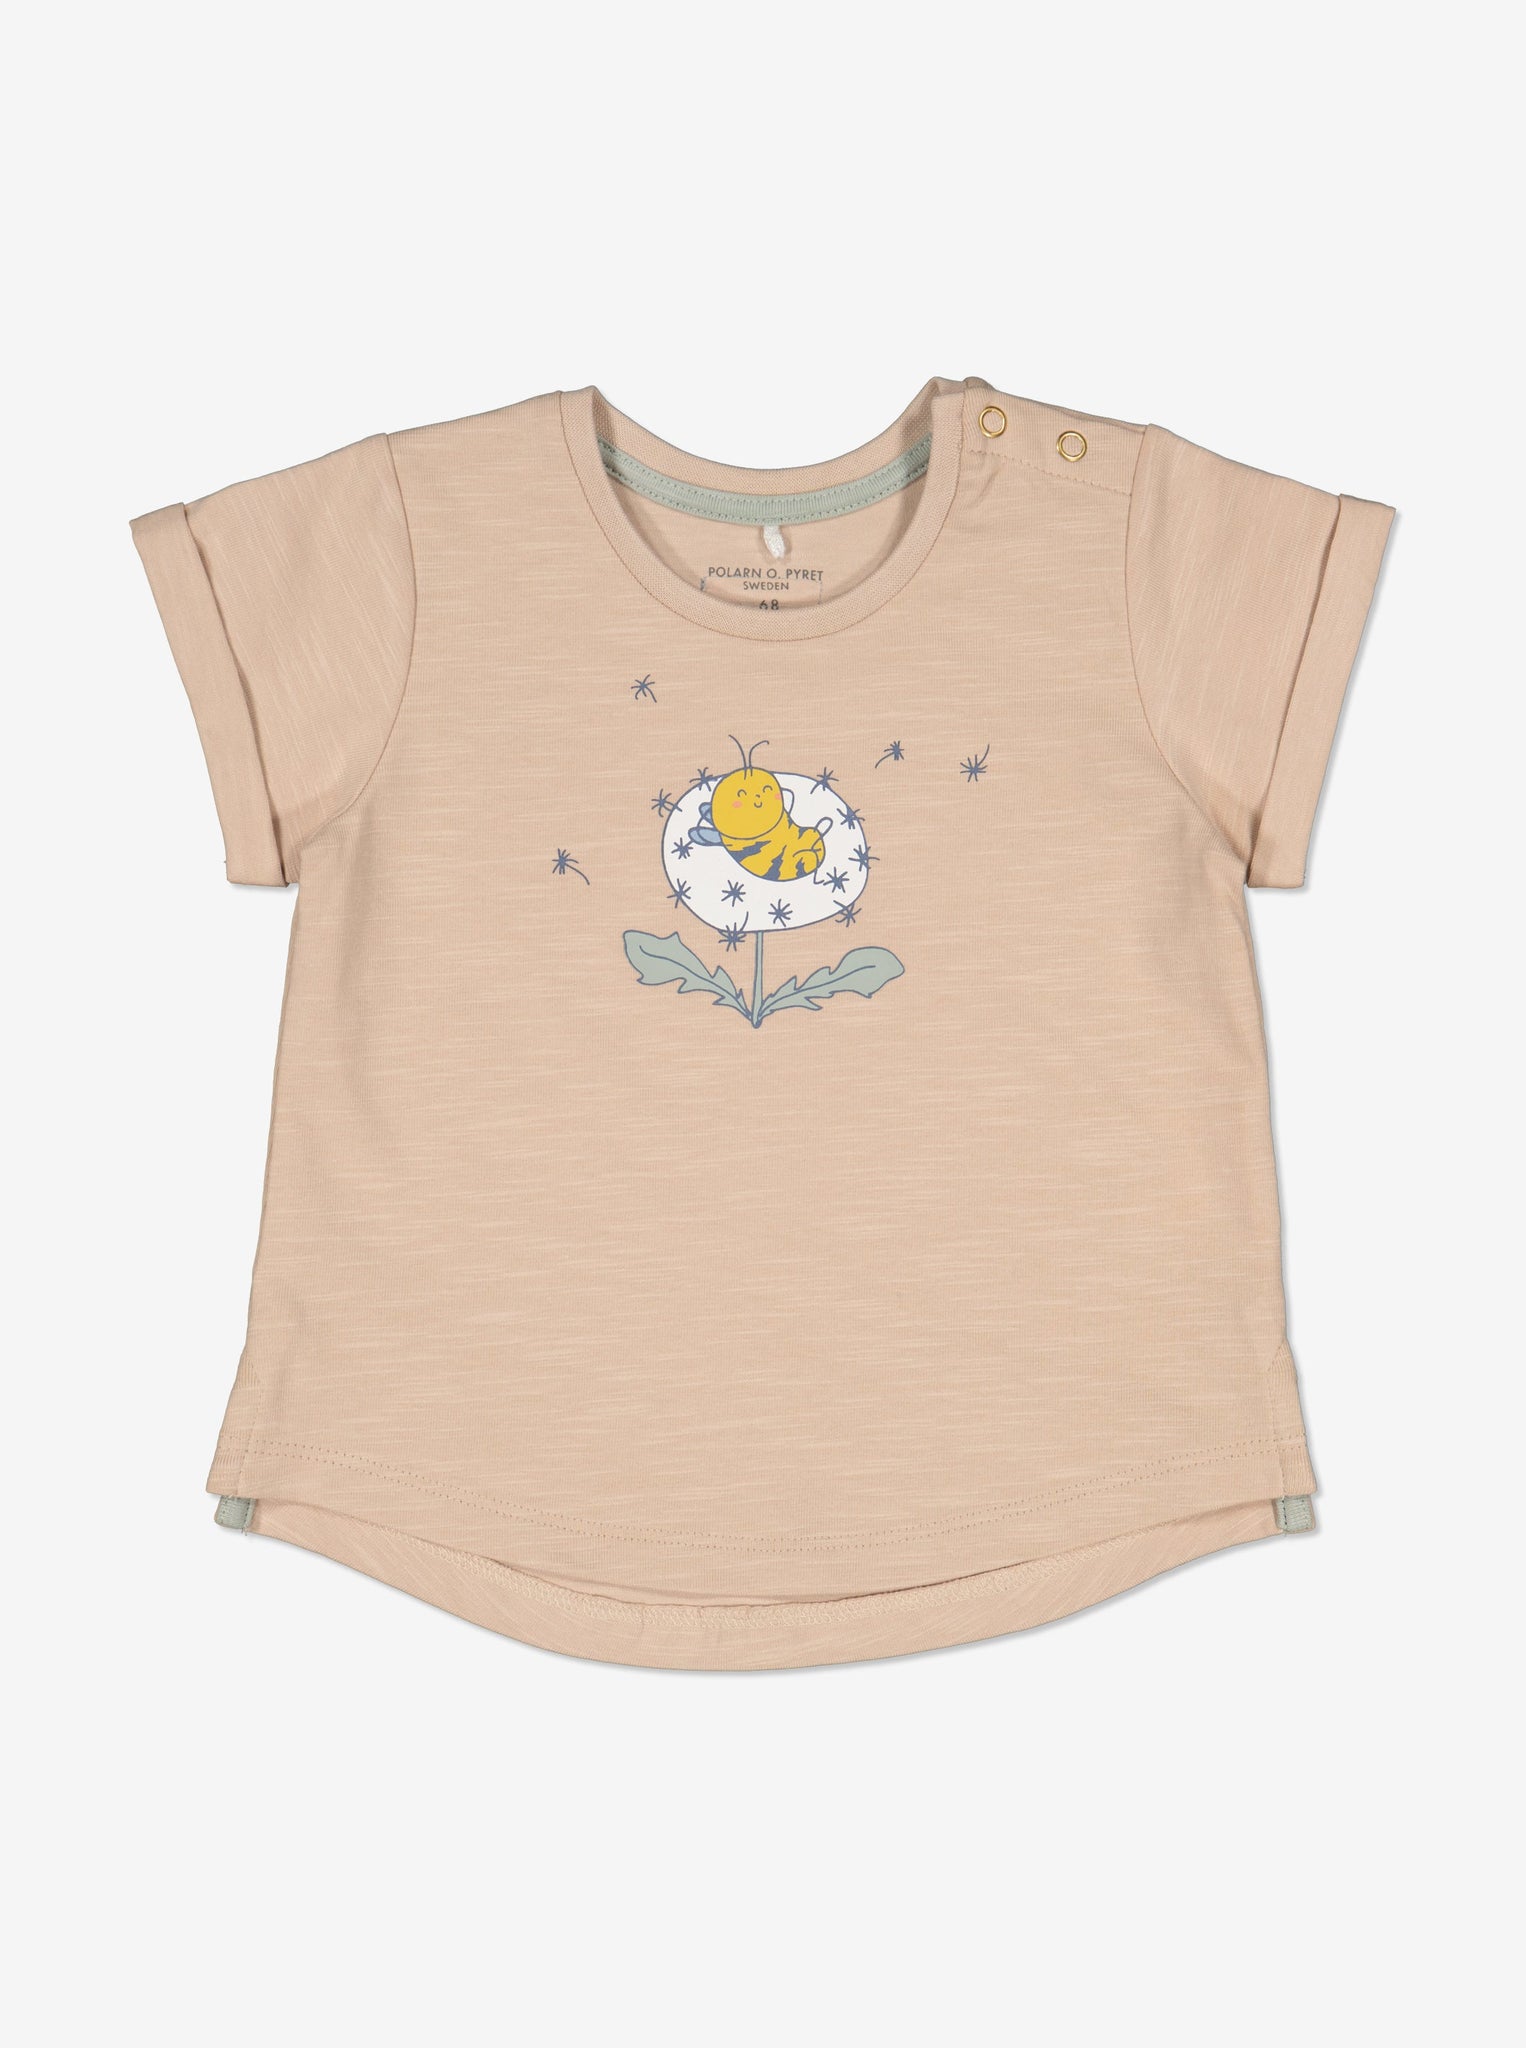 Bumble Bee Unisex Baby T-Shirt from Polarn O. Pyret Kidswear. Made from ethically sourced materials.